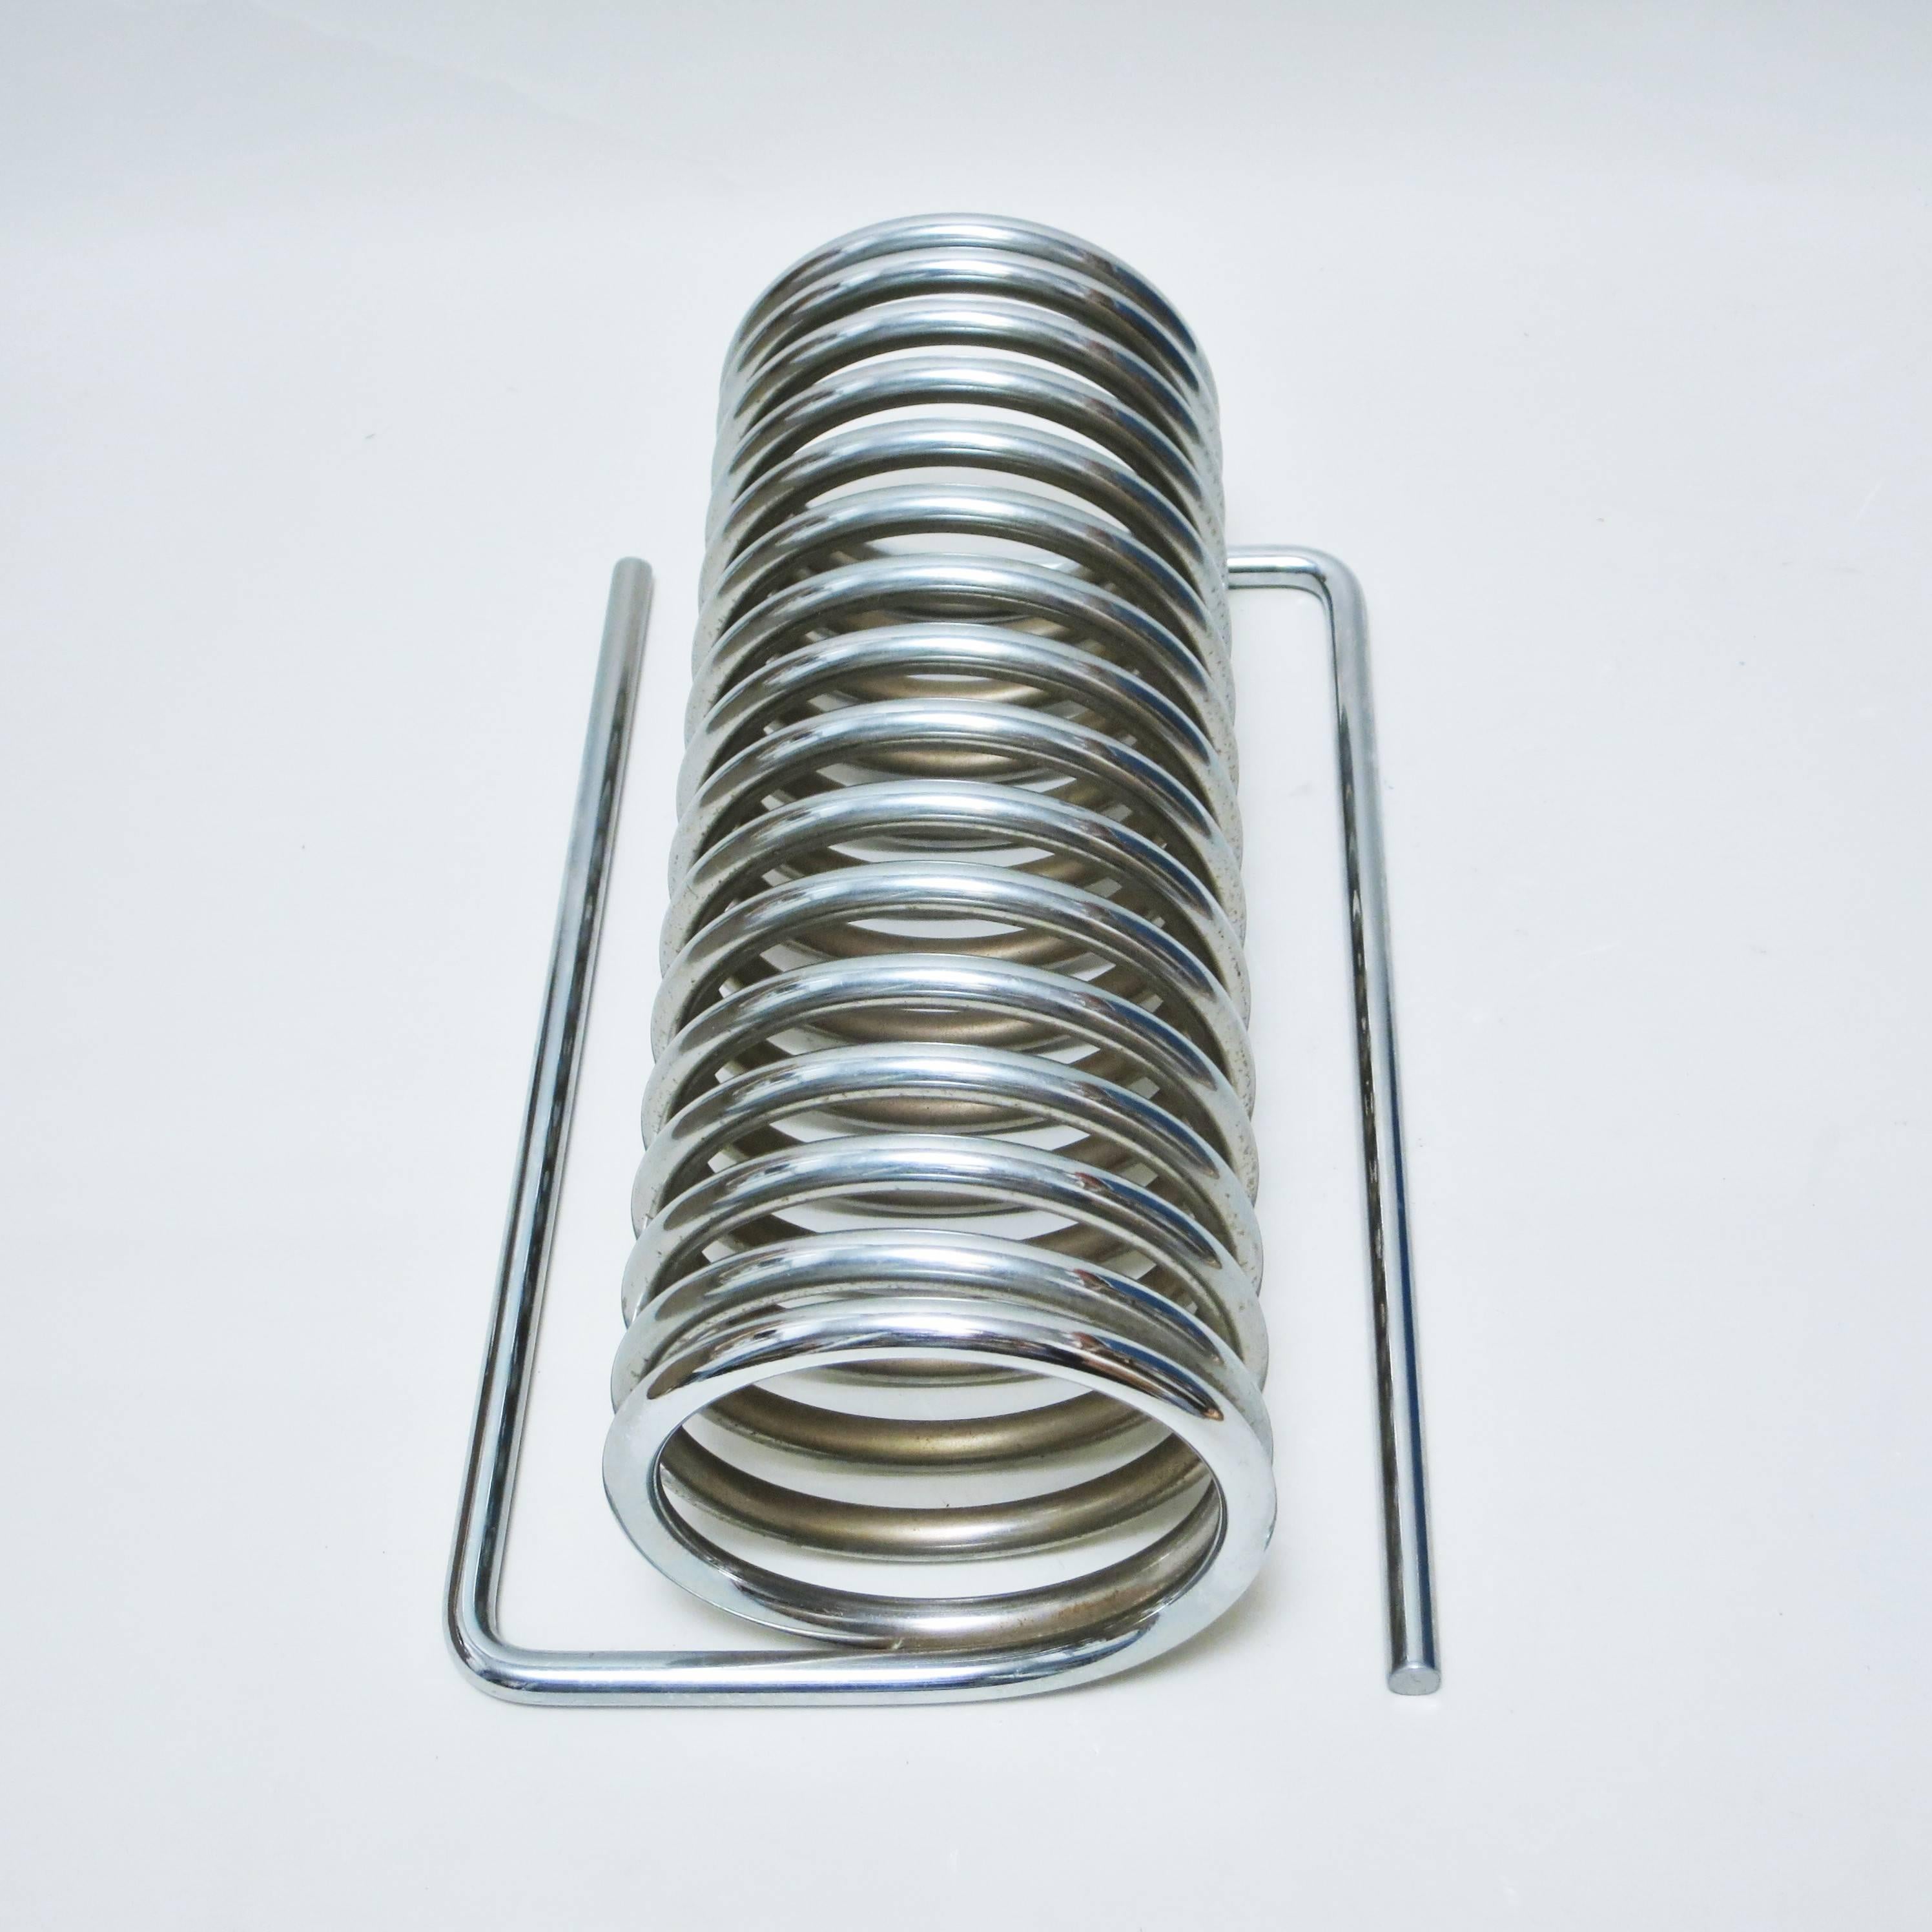 Rare Yonel Lebovici chrome-plated steel spring to be used as a magazine rack or as a Pop Art sculpture. It was produced by Distrimex in the late 1960s in two sizes, this example is the large size.